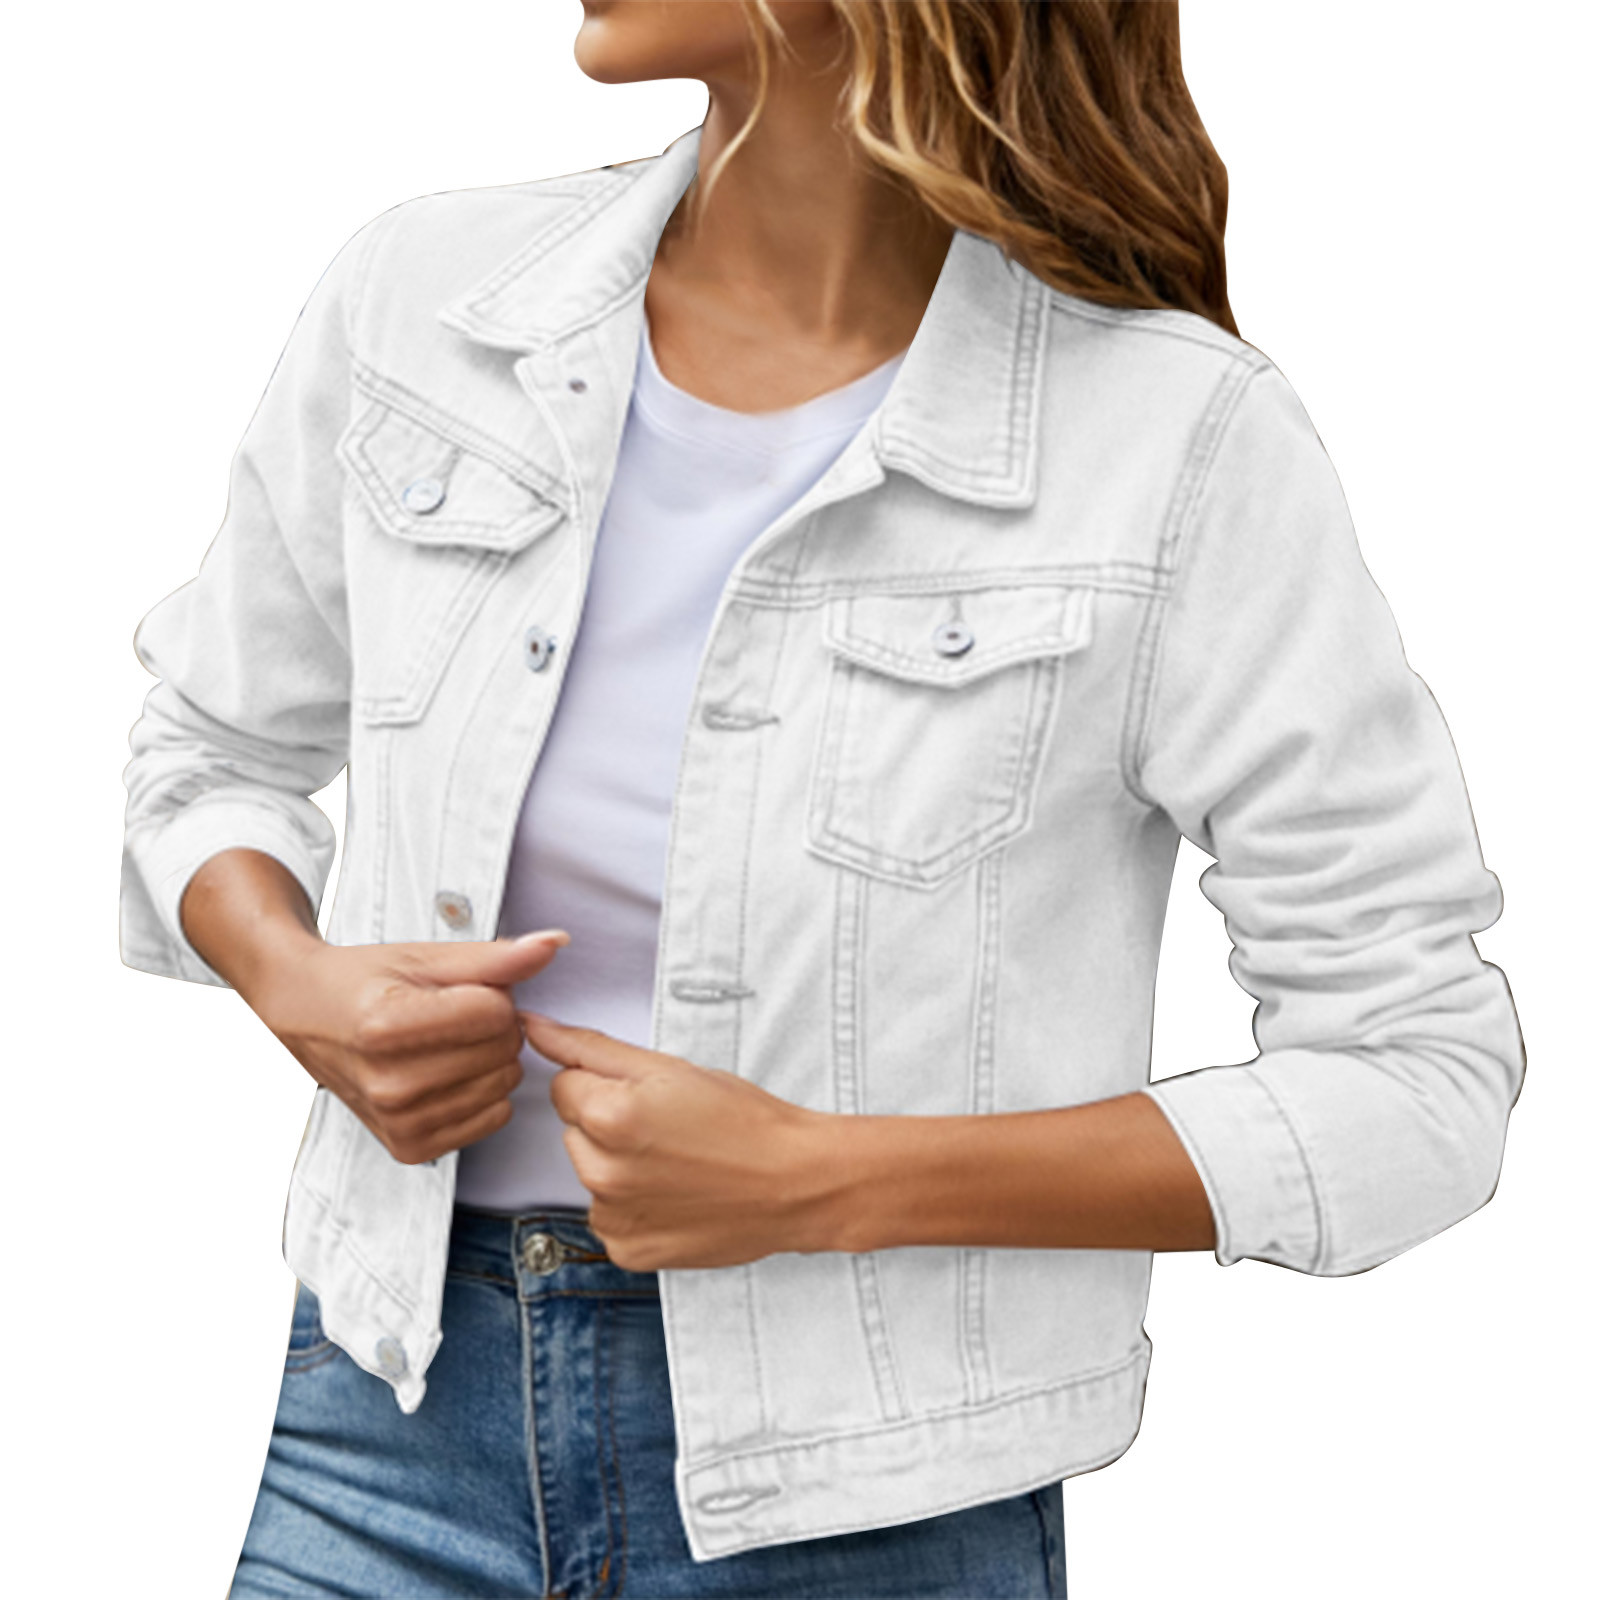 iOPQO womens sweaters Women's Basic Solid Color Button Down Denim Cotton Jacket With Pockets Denim Jacket Coat Women's Denim Jackets White XXL - image 1 of 8